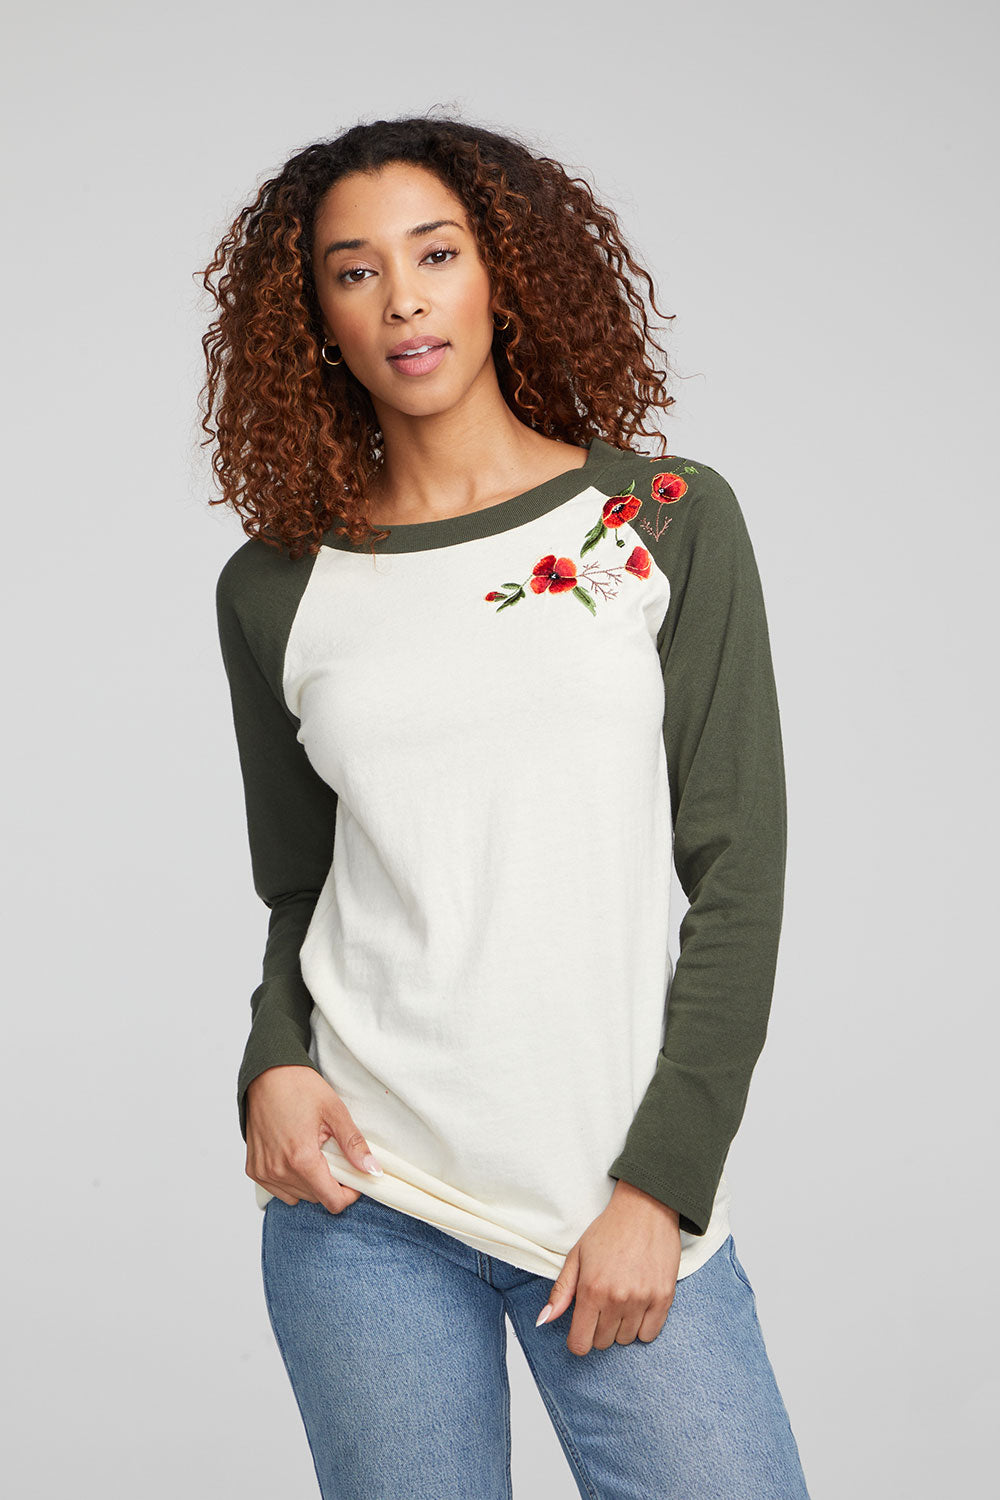 Poppy Embroidery Football Long Sleeve WOMENS chaserbrand